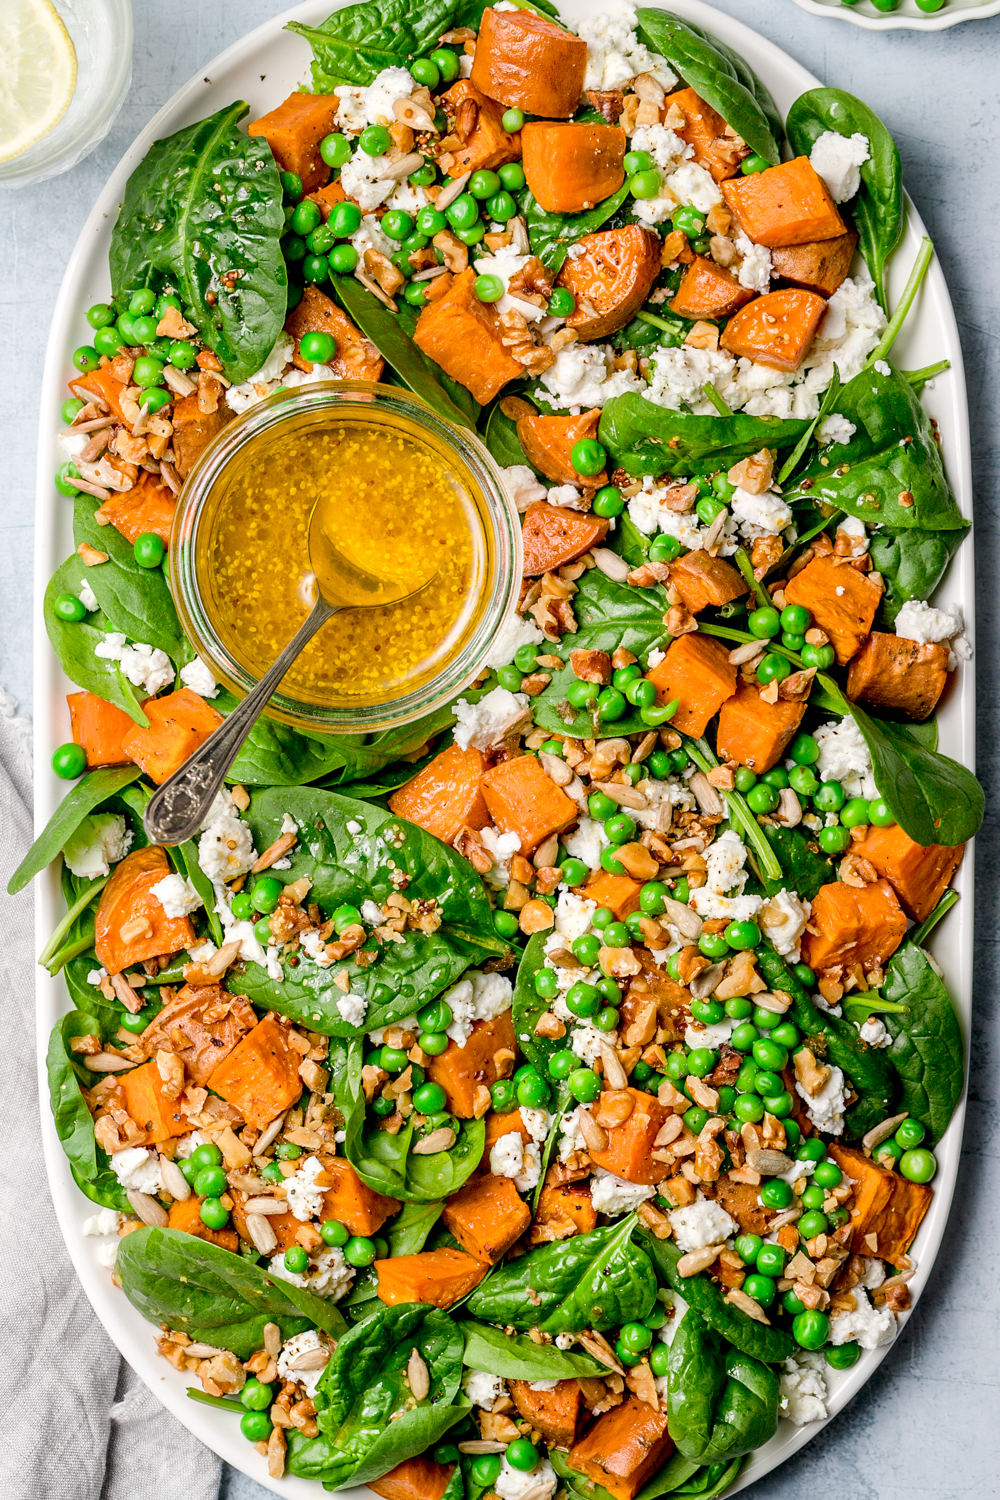 salad of spinach, sweet potato, peas and feta topped with mustard dressing in small bowl